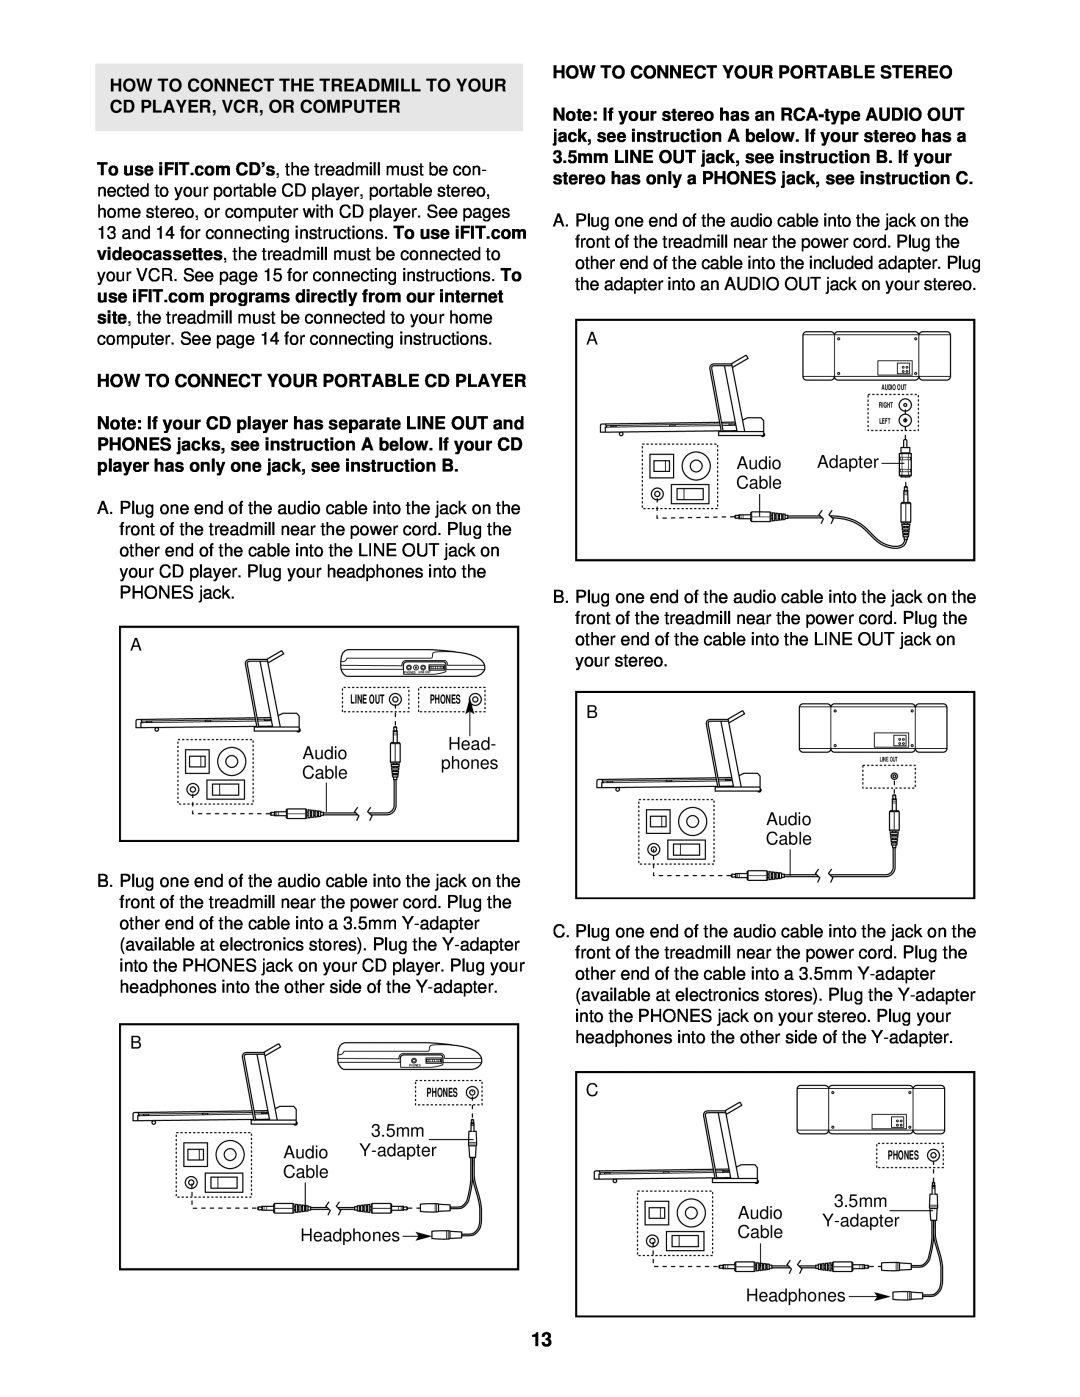 ProForm DRTL99720 How To Connect The Treadmill To Your Cd Player, Vcr, Or Computer, videocassettes, To use iFIT.com 